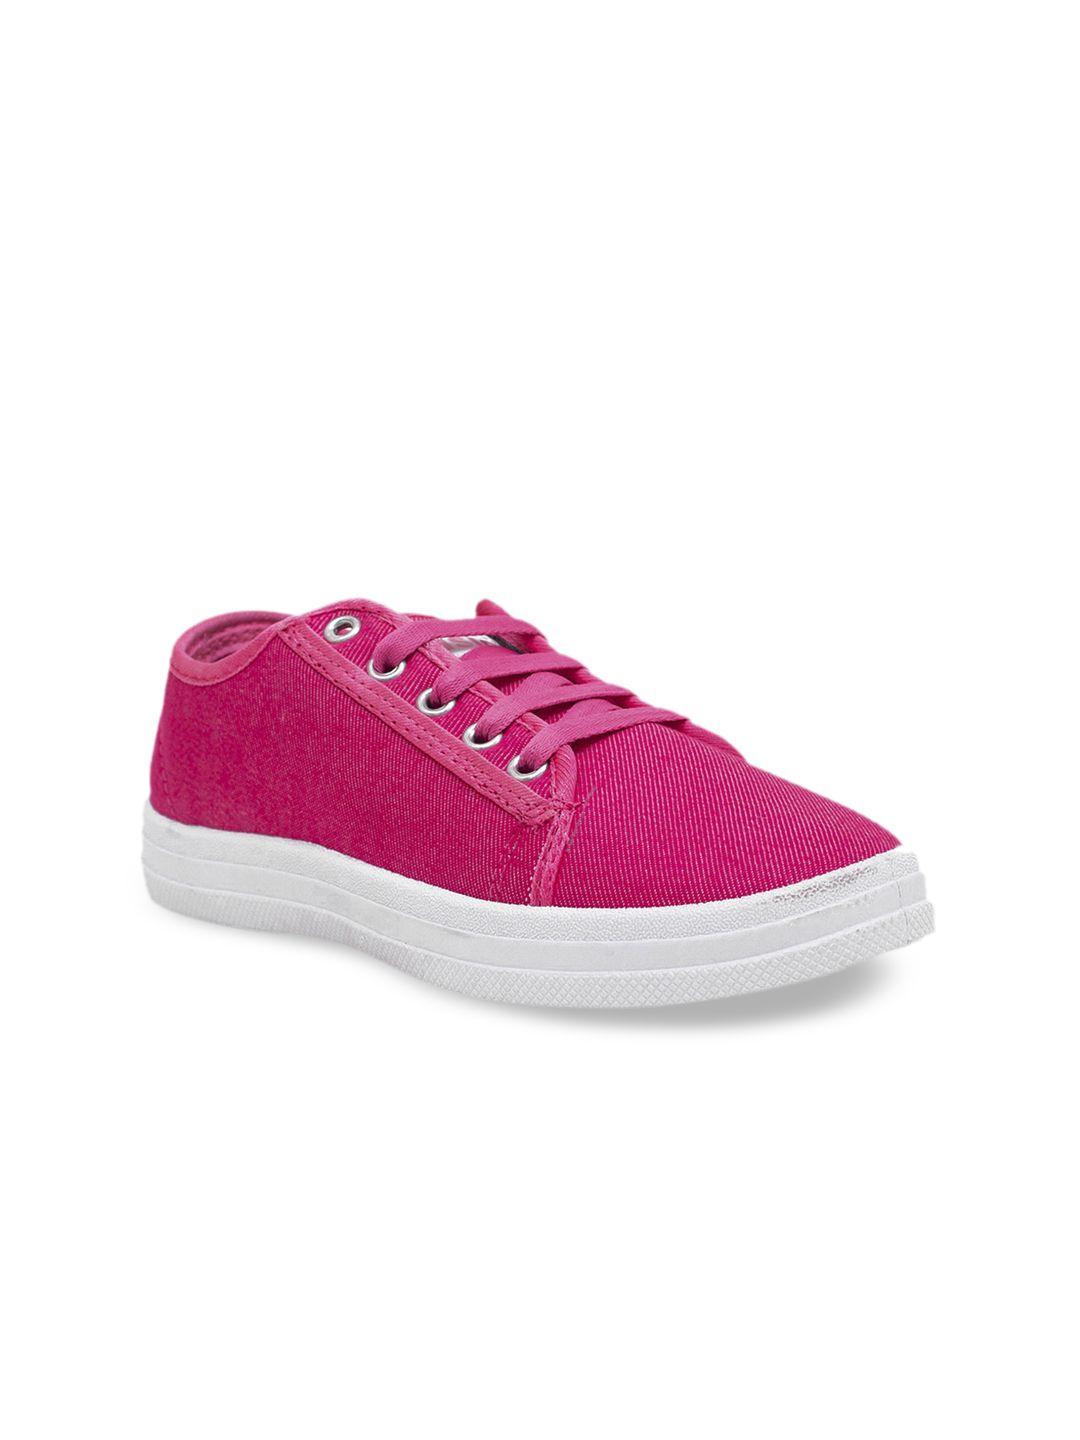 asian-women-pink-solid-sneakers